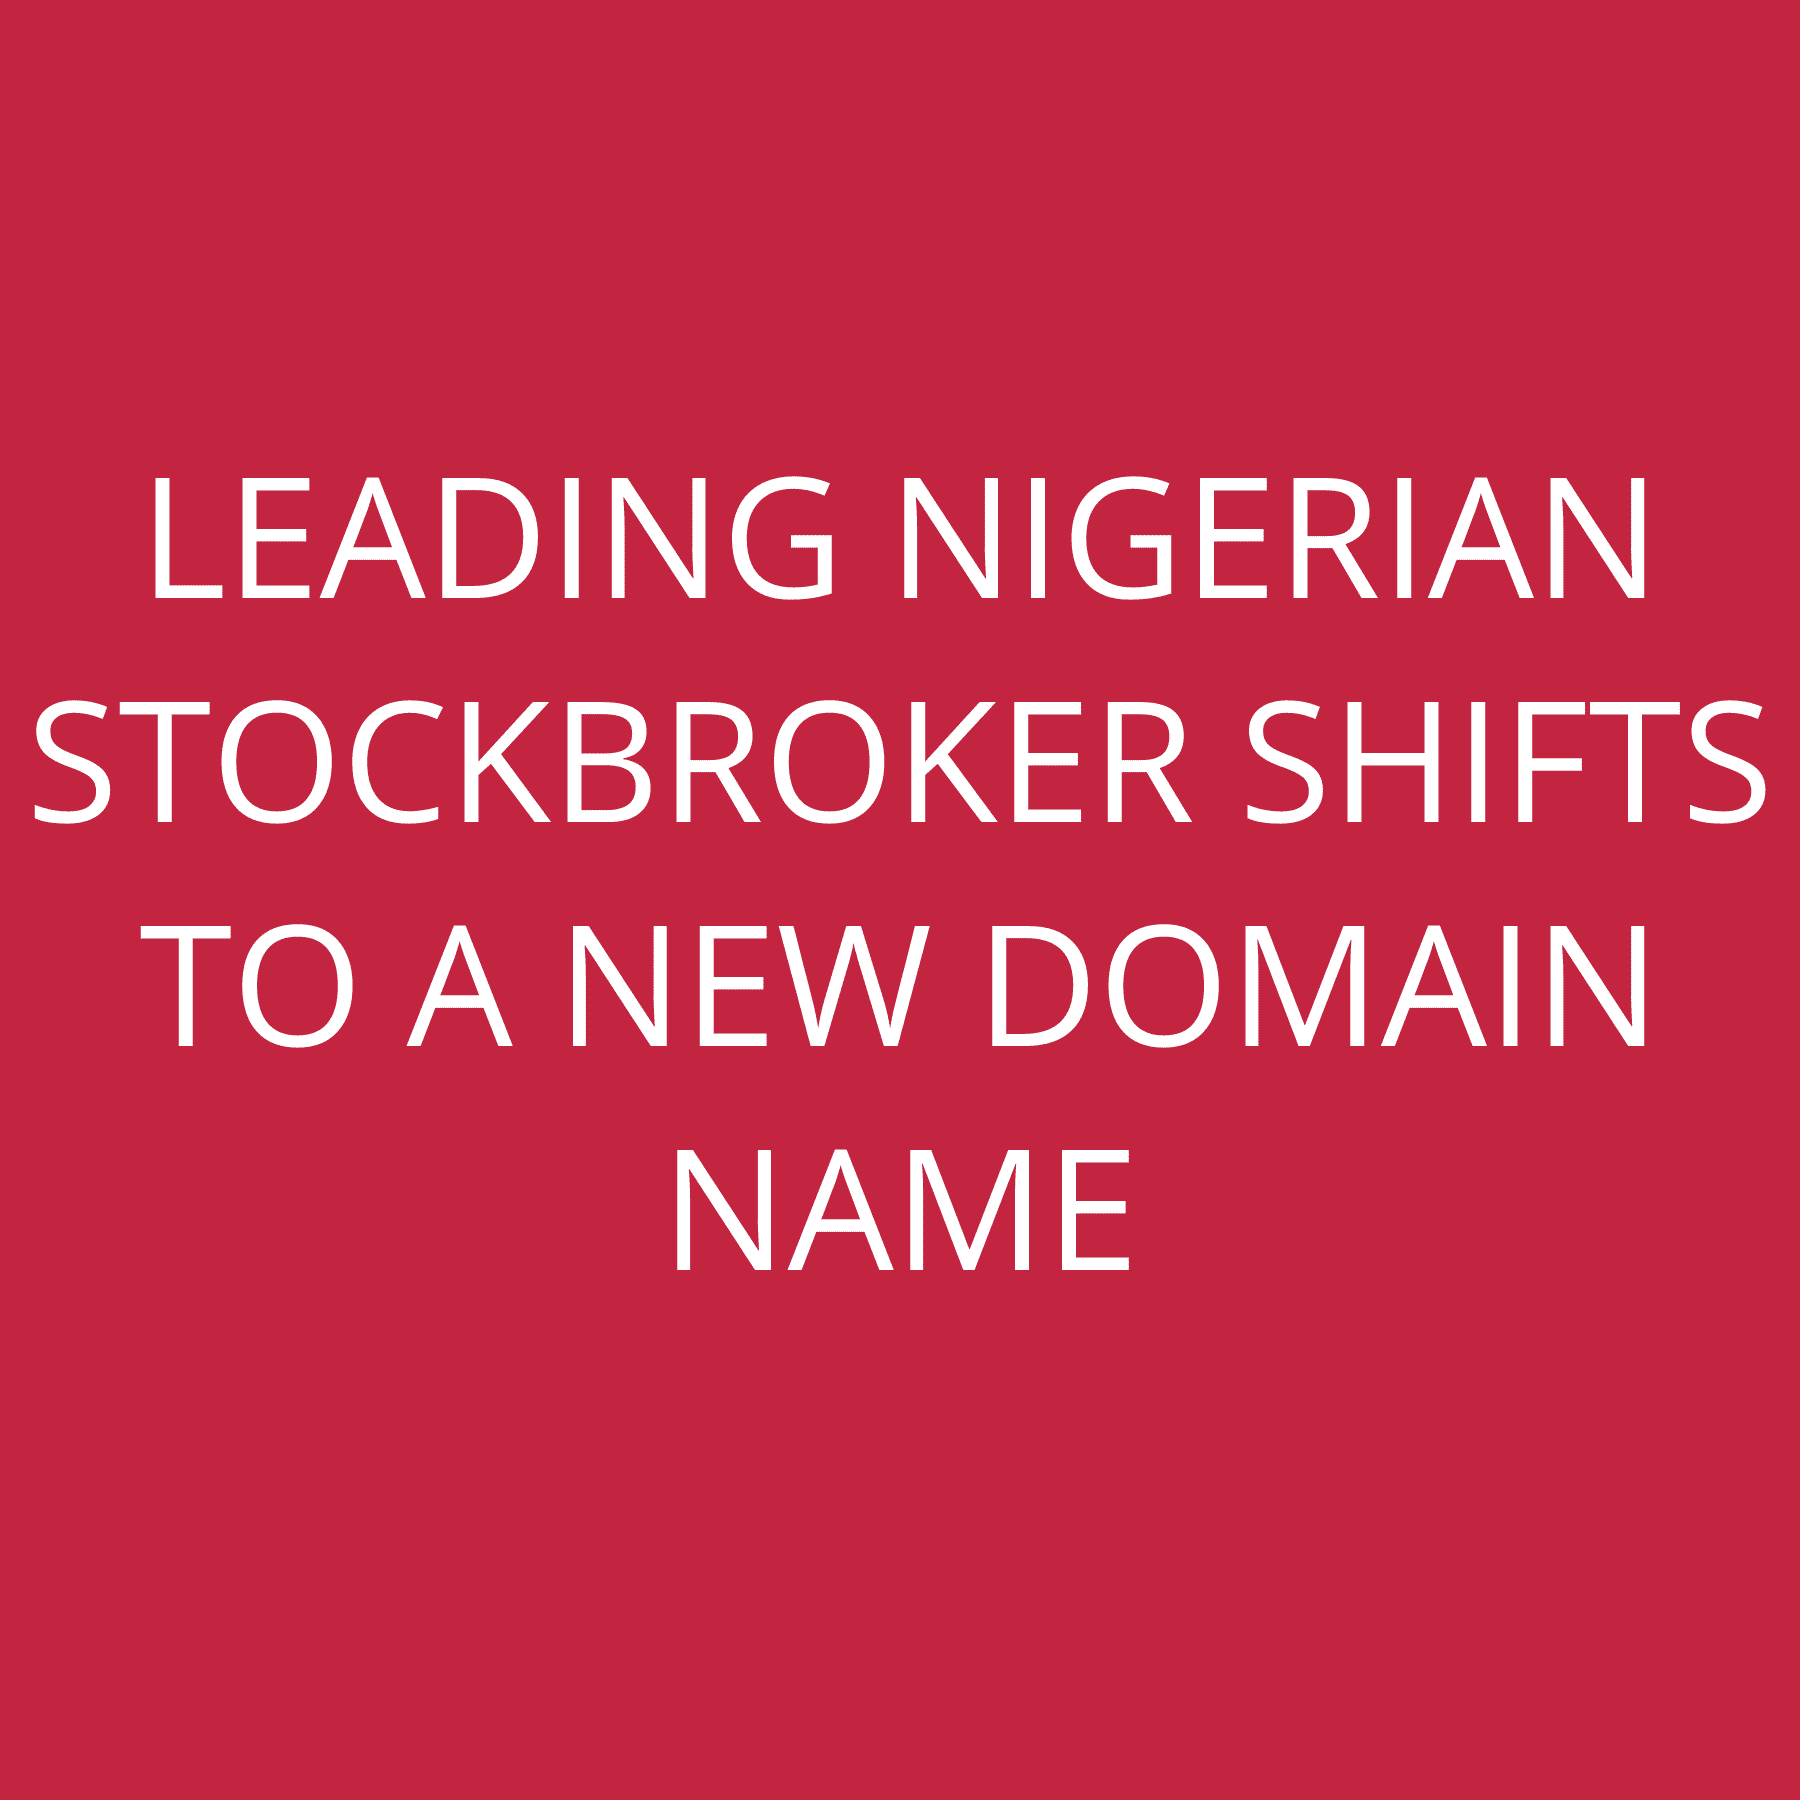 Leading Nigerian stockbroker SHIFTs to a new domain name